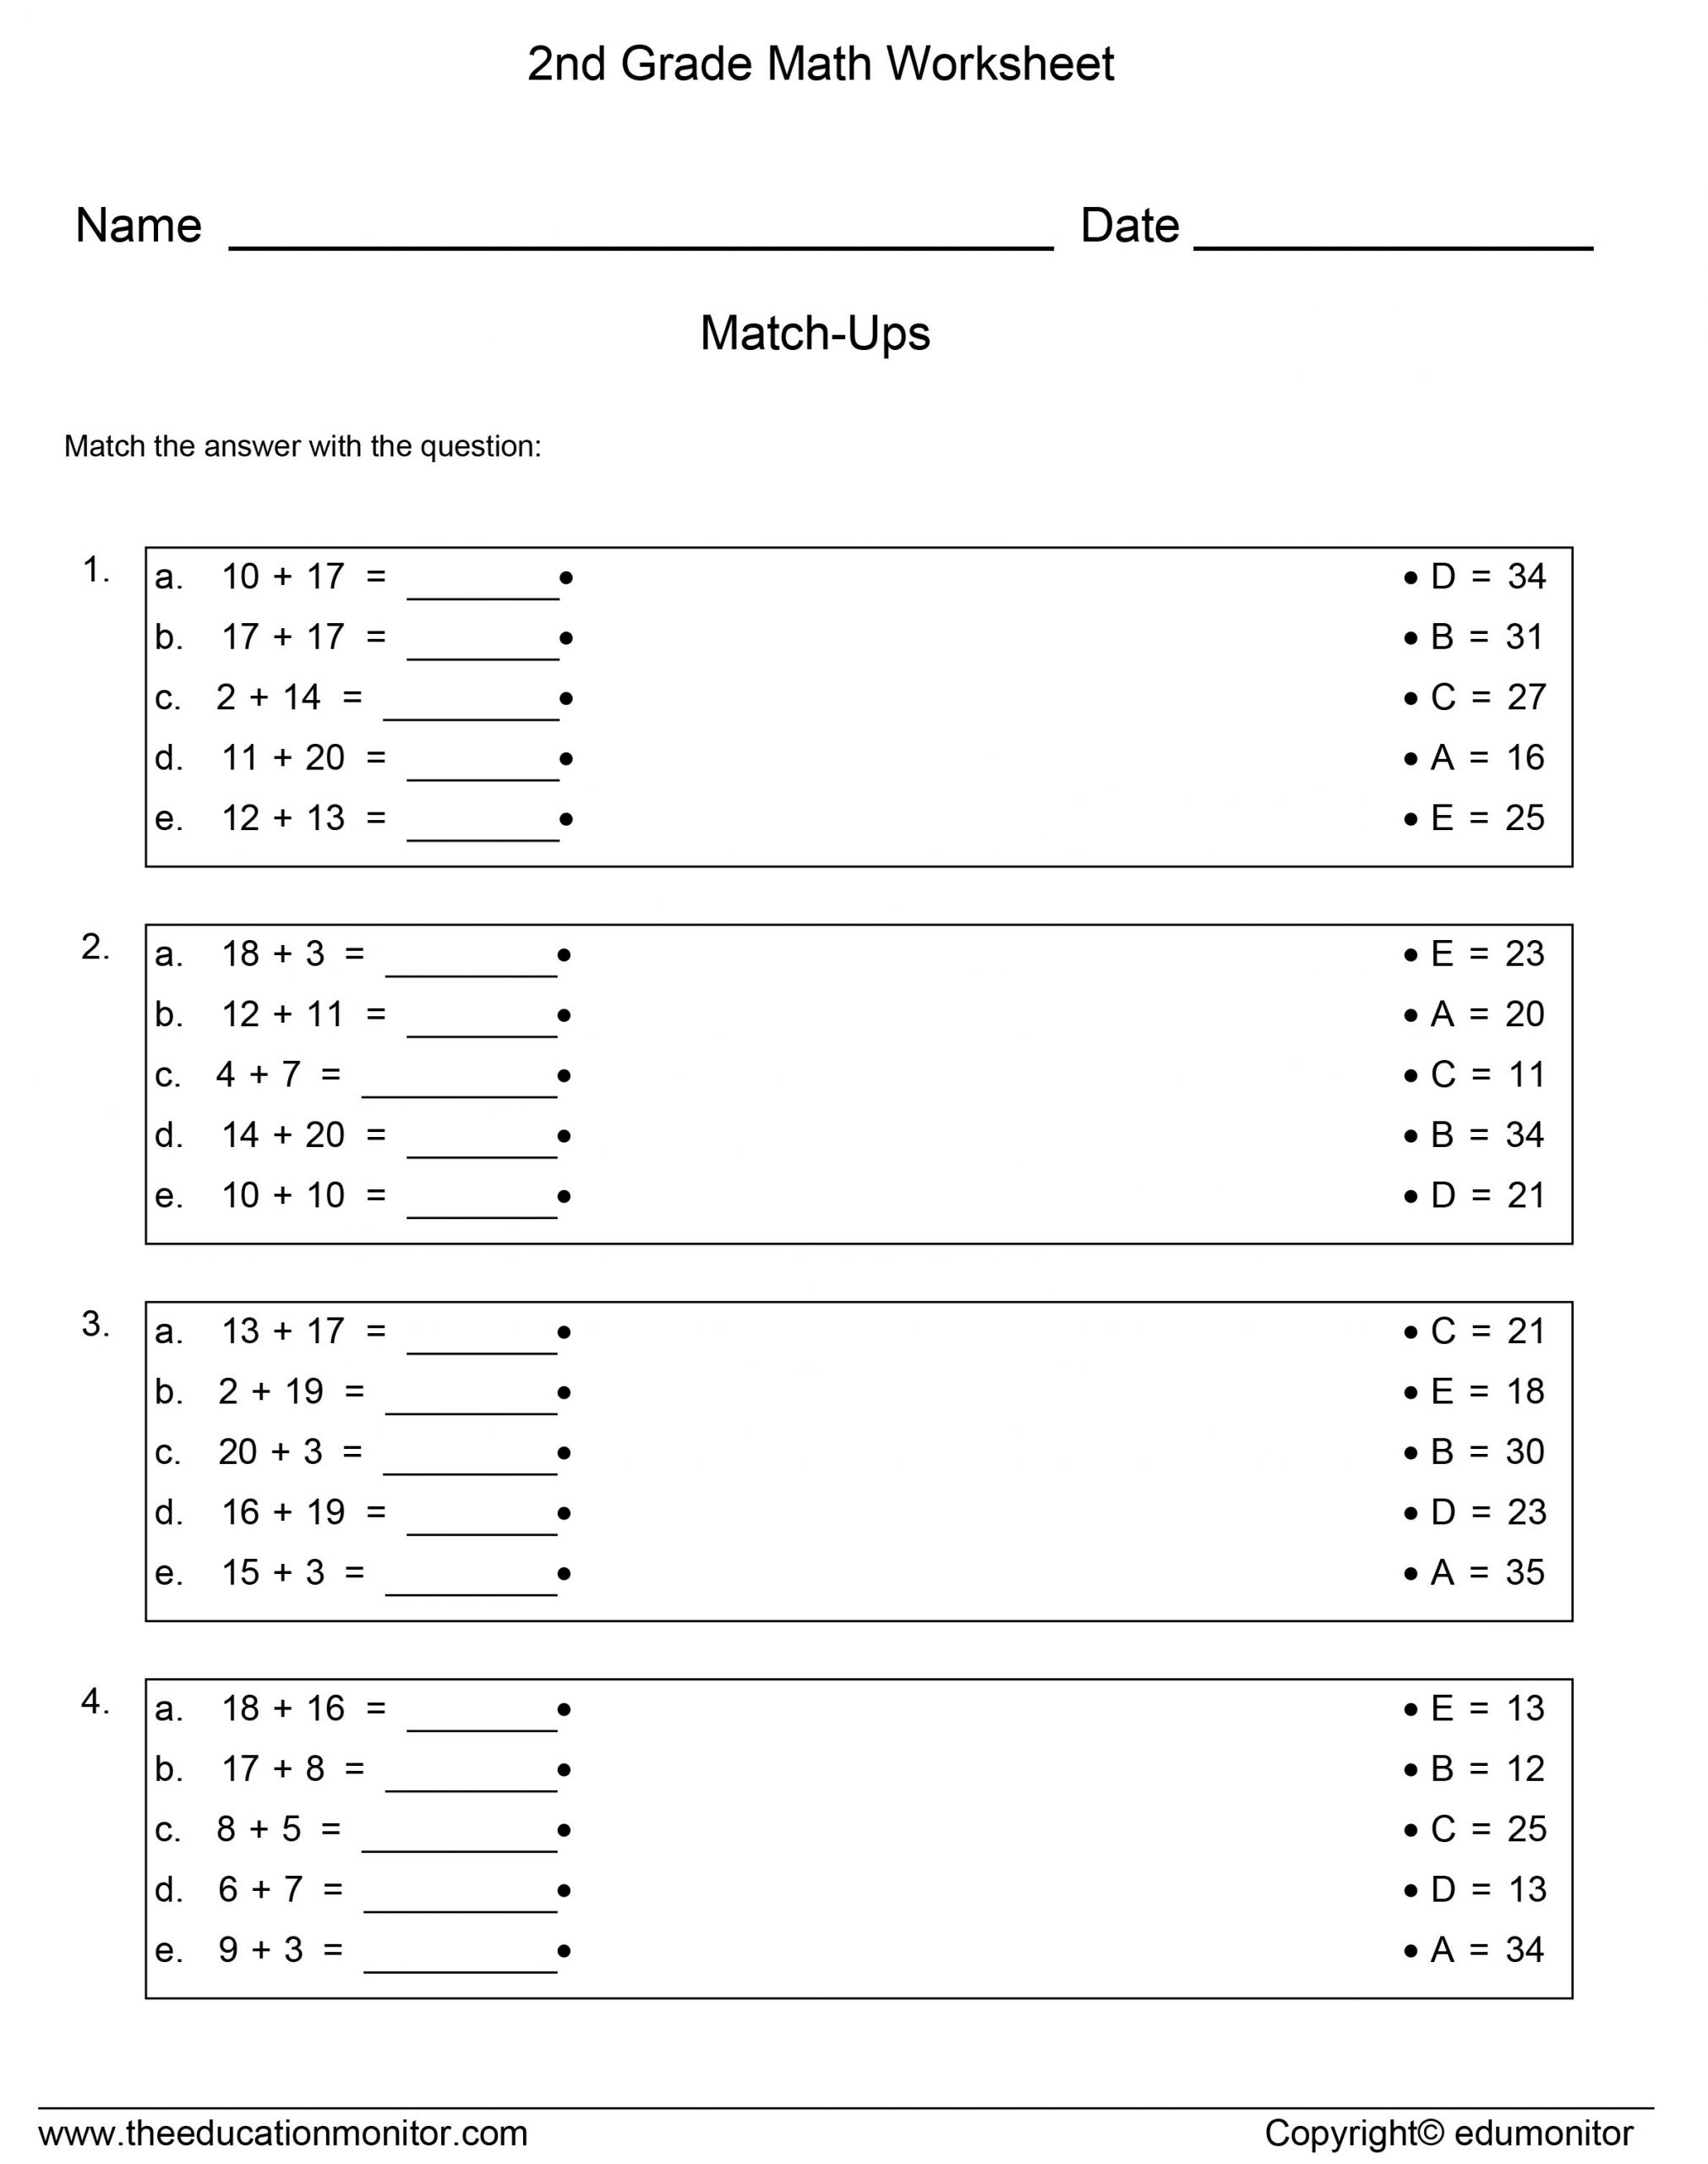 Free Math Worksheets Third Grade 3 Counting Money Counting Money Pennies Nickels Dimes Quarters